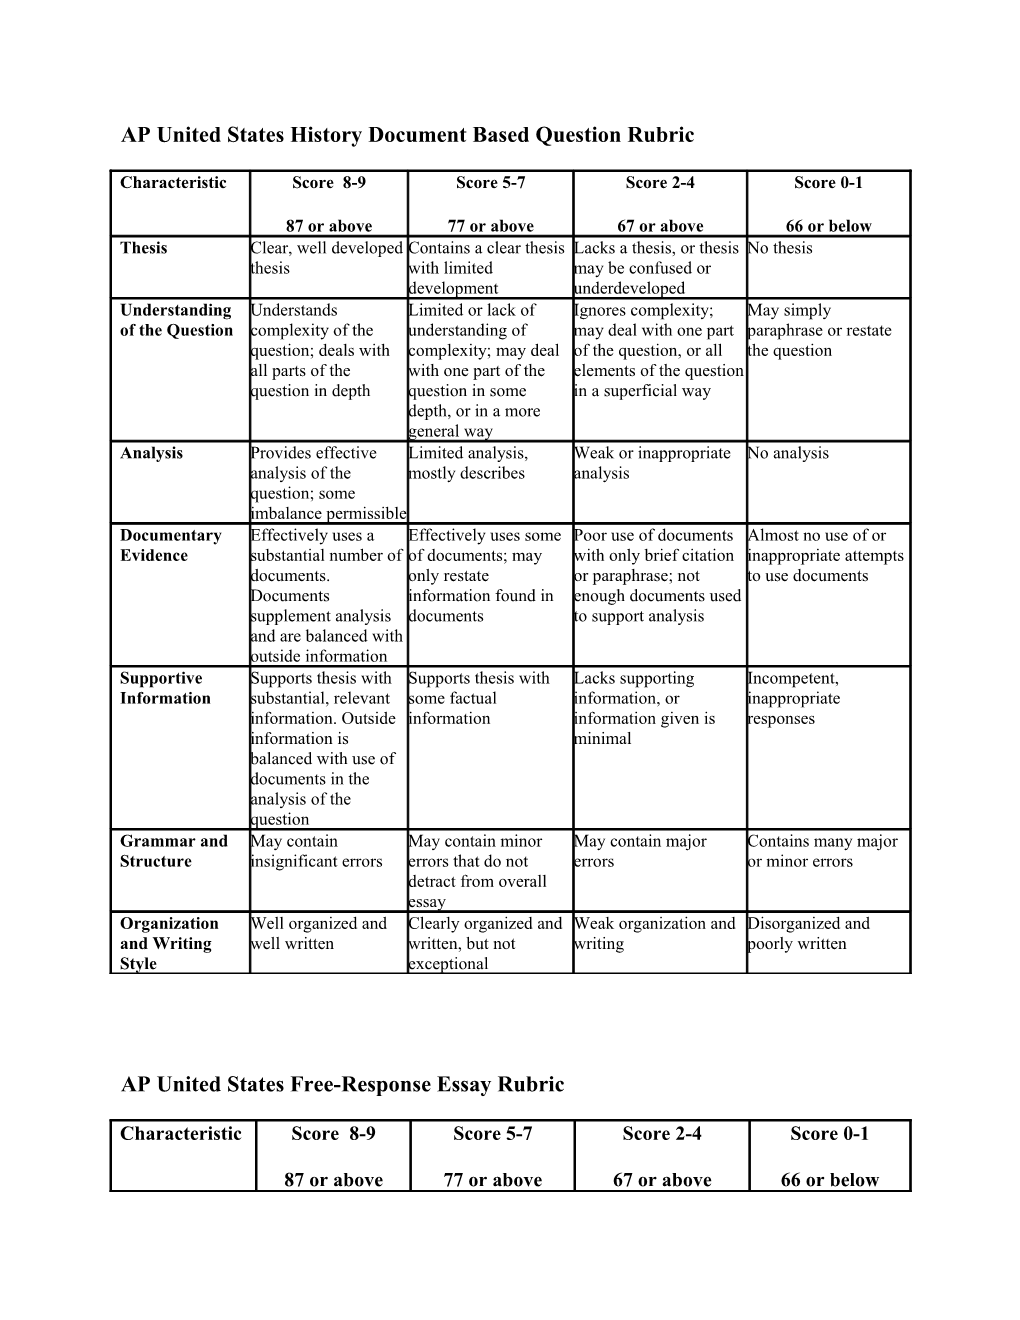 AP United States History Document Based Question Rubric